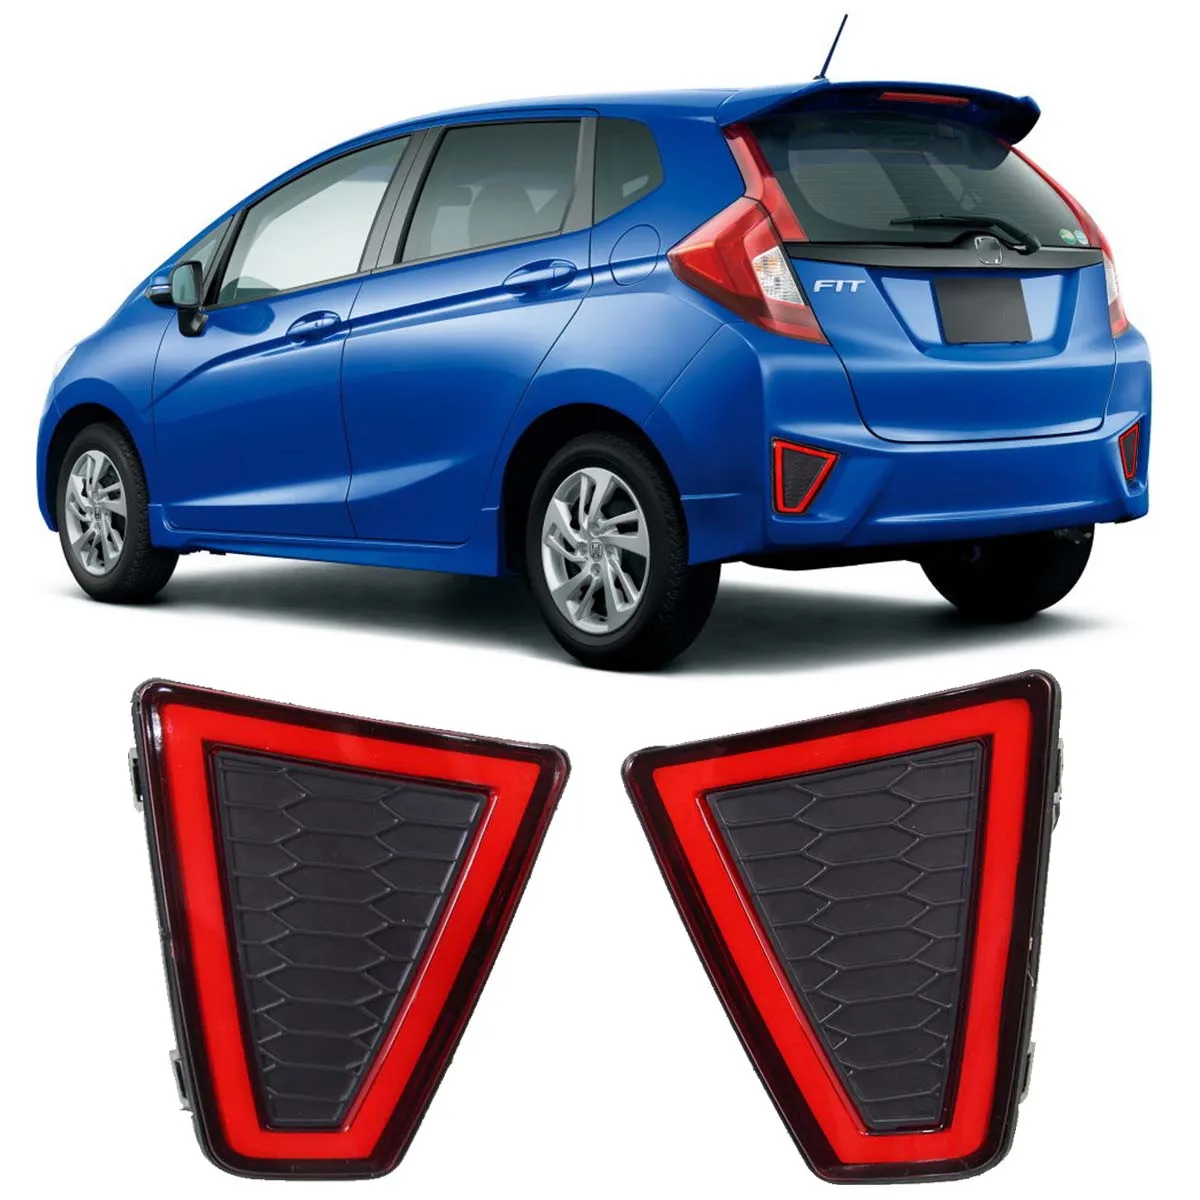 

2PCS Rear Bumper Reflector Light For Honda Fit Or Jazz 2014 - 2015 With 2 Function